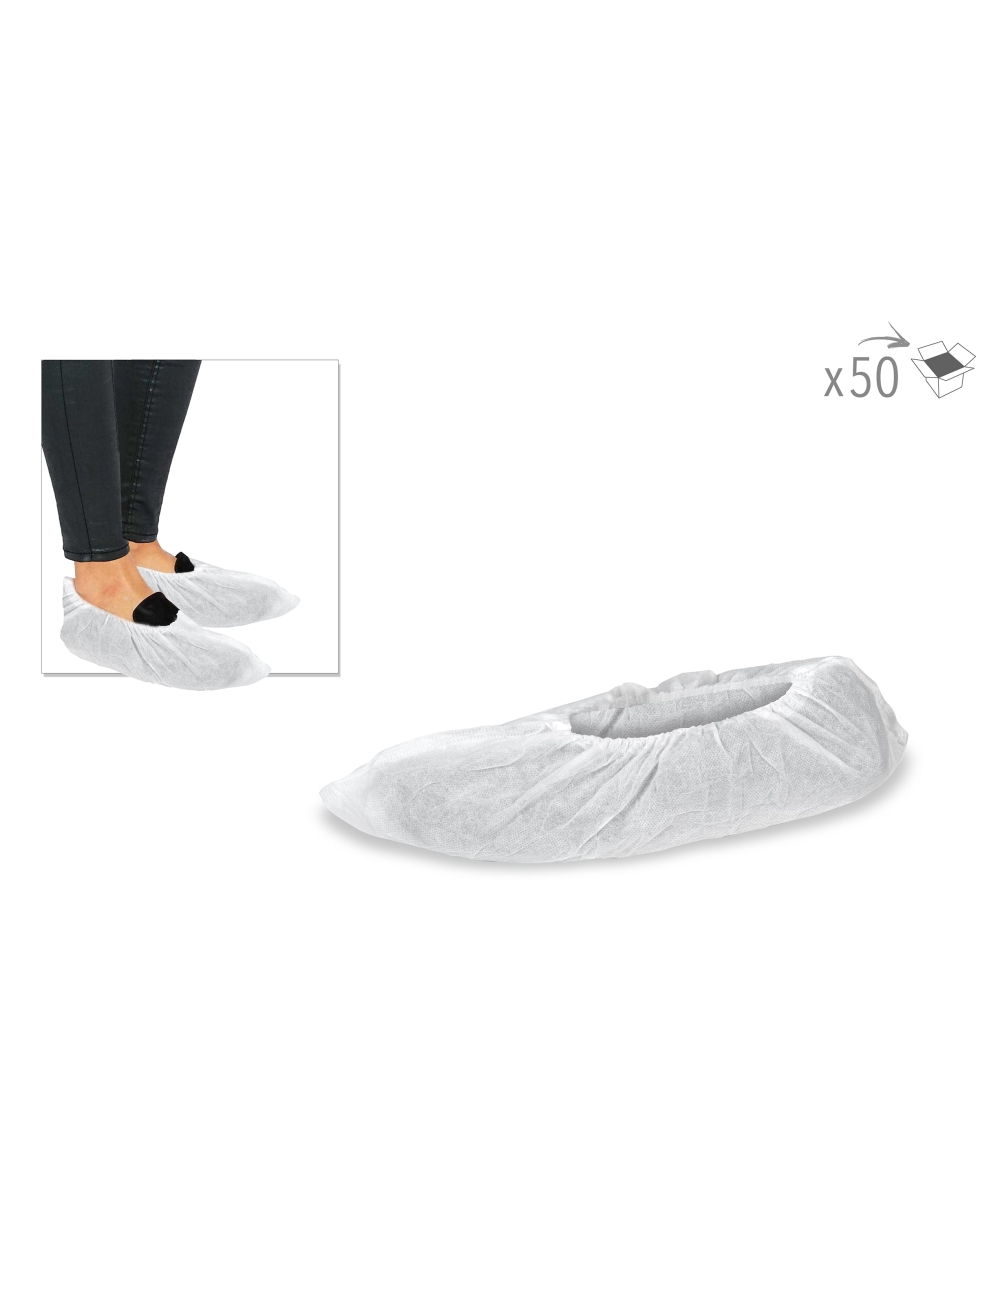 PROTECTIONS - LCH - COUVRE CHAUSSURE BLANC (x50)